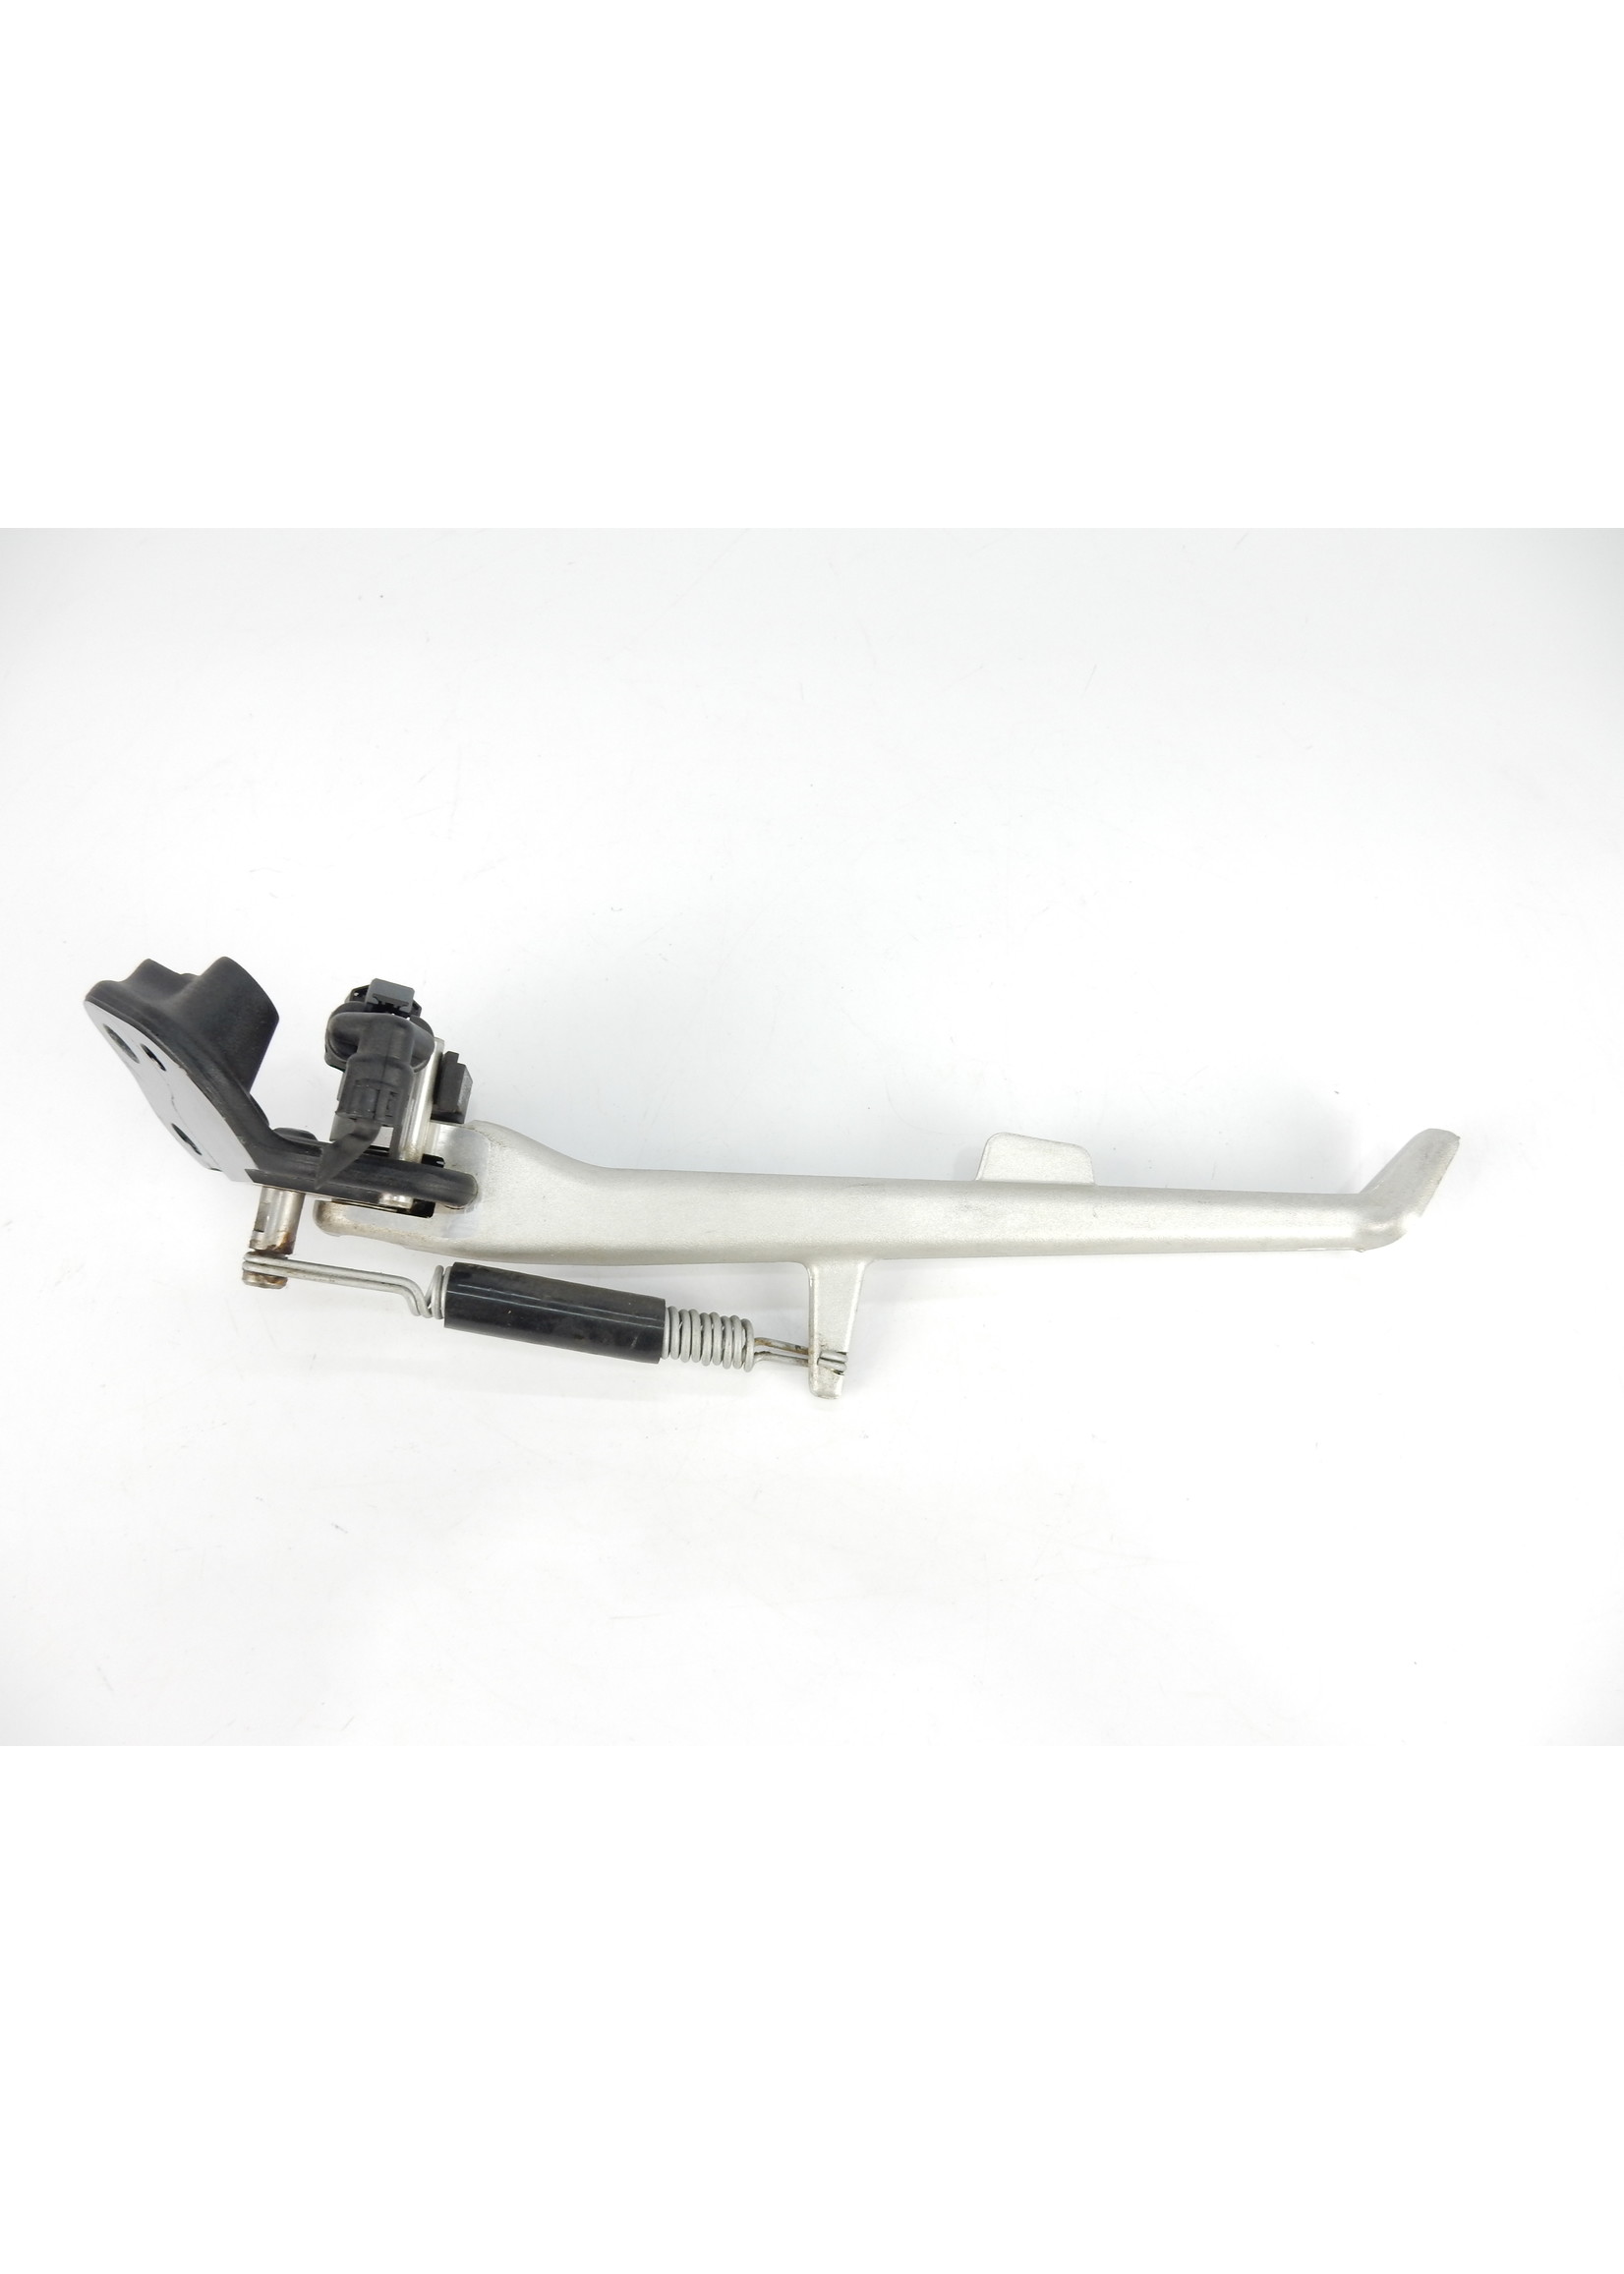 BMW BMW S 1000 RR Side stand / Supporting bracket f side stand / Switch, side stand / Tension spring / 46538361541 / 46538373657 / 61328535708 / 46537690990